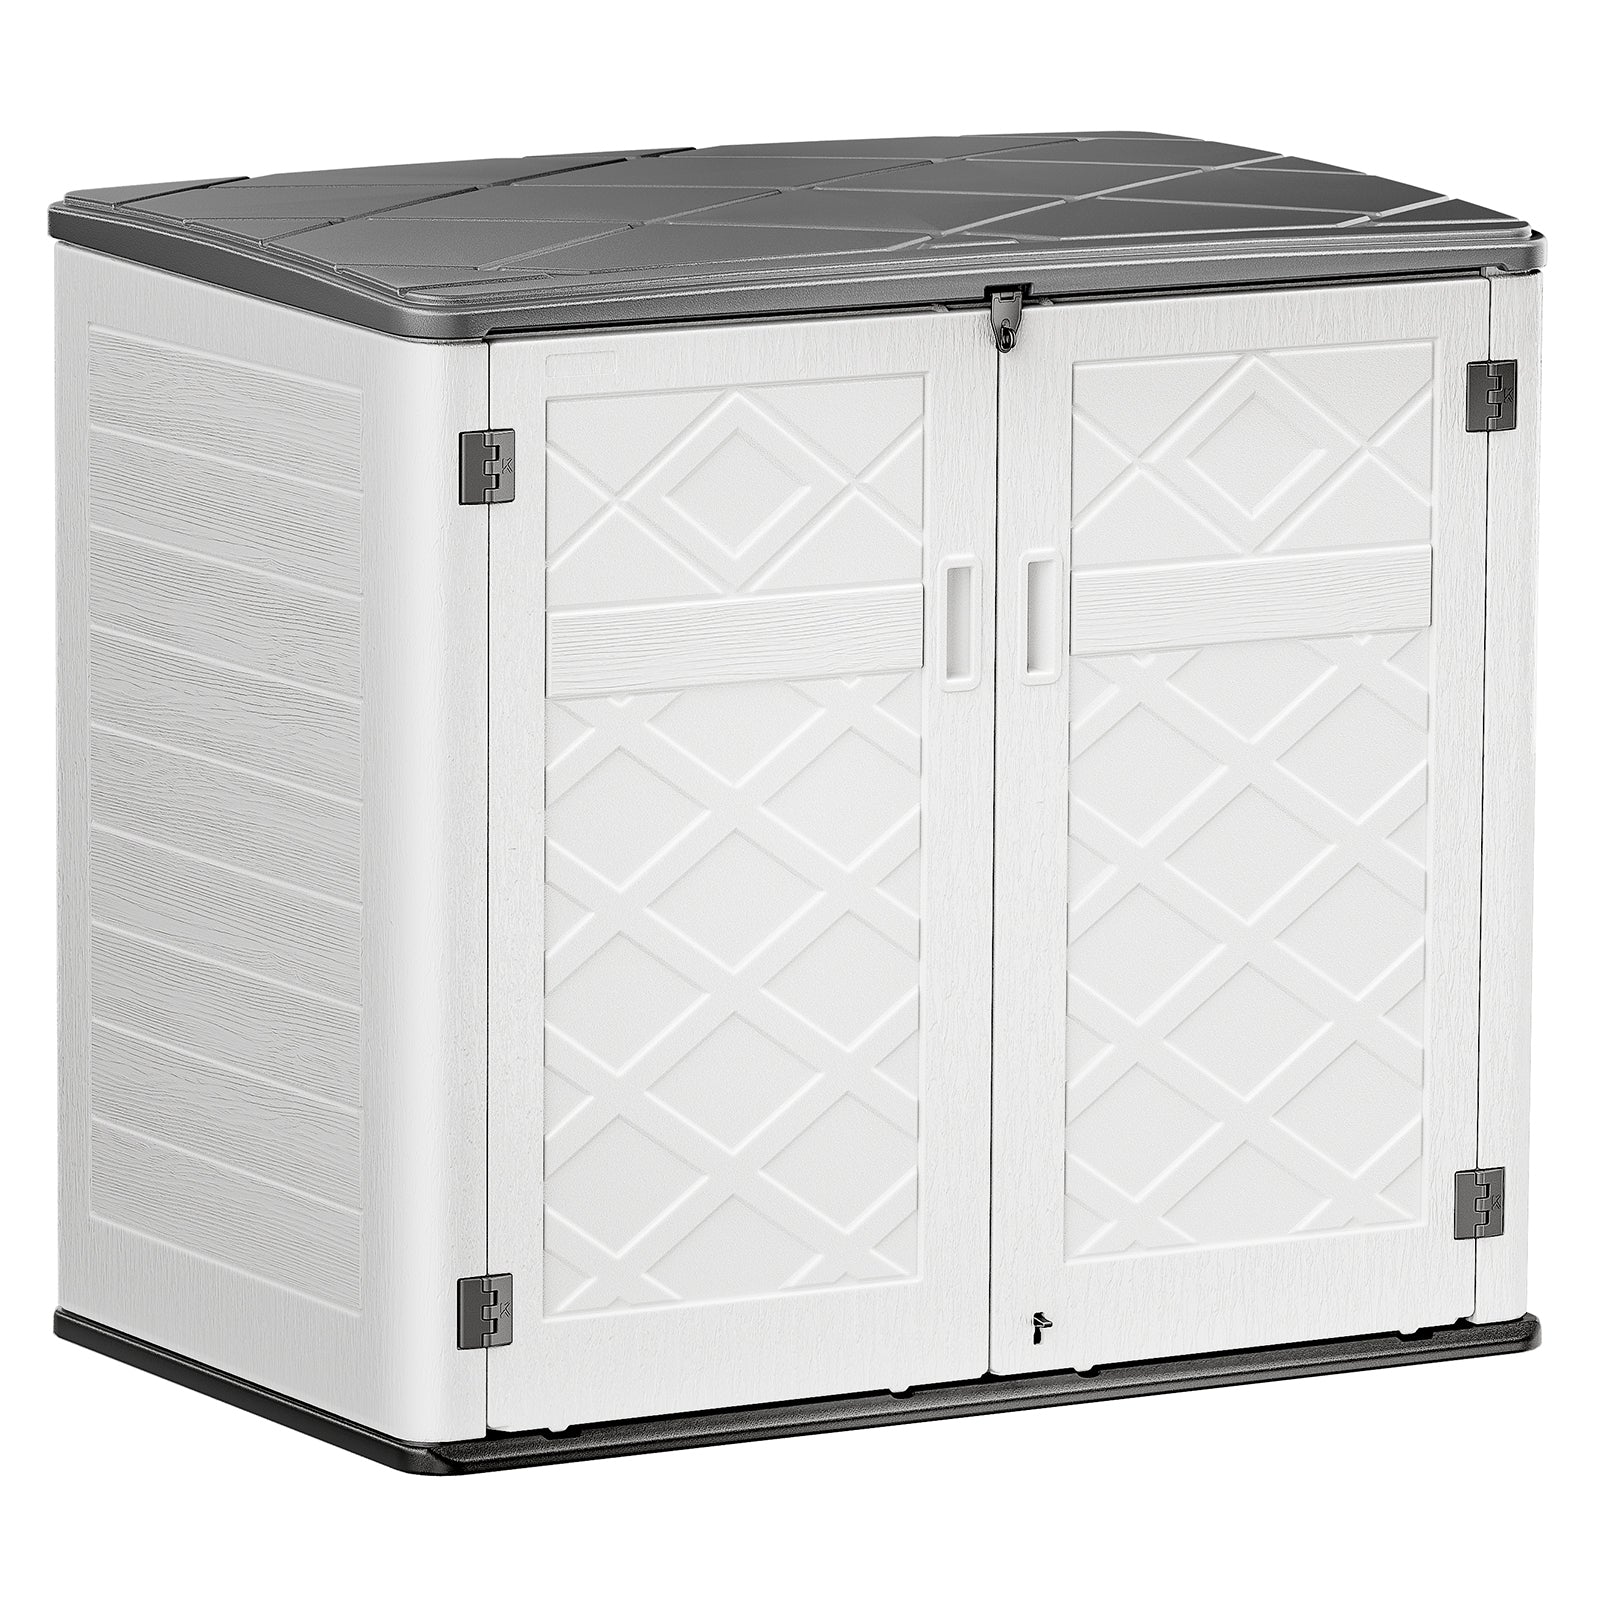 Gizoon CC60 Outdoor Resin Storage Shed with Reinforced Floor and Double Lockable Doors